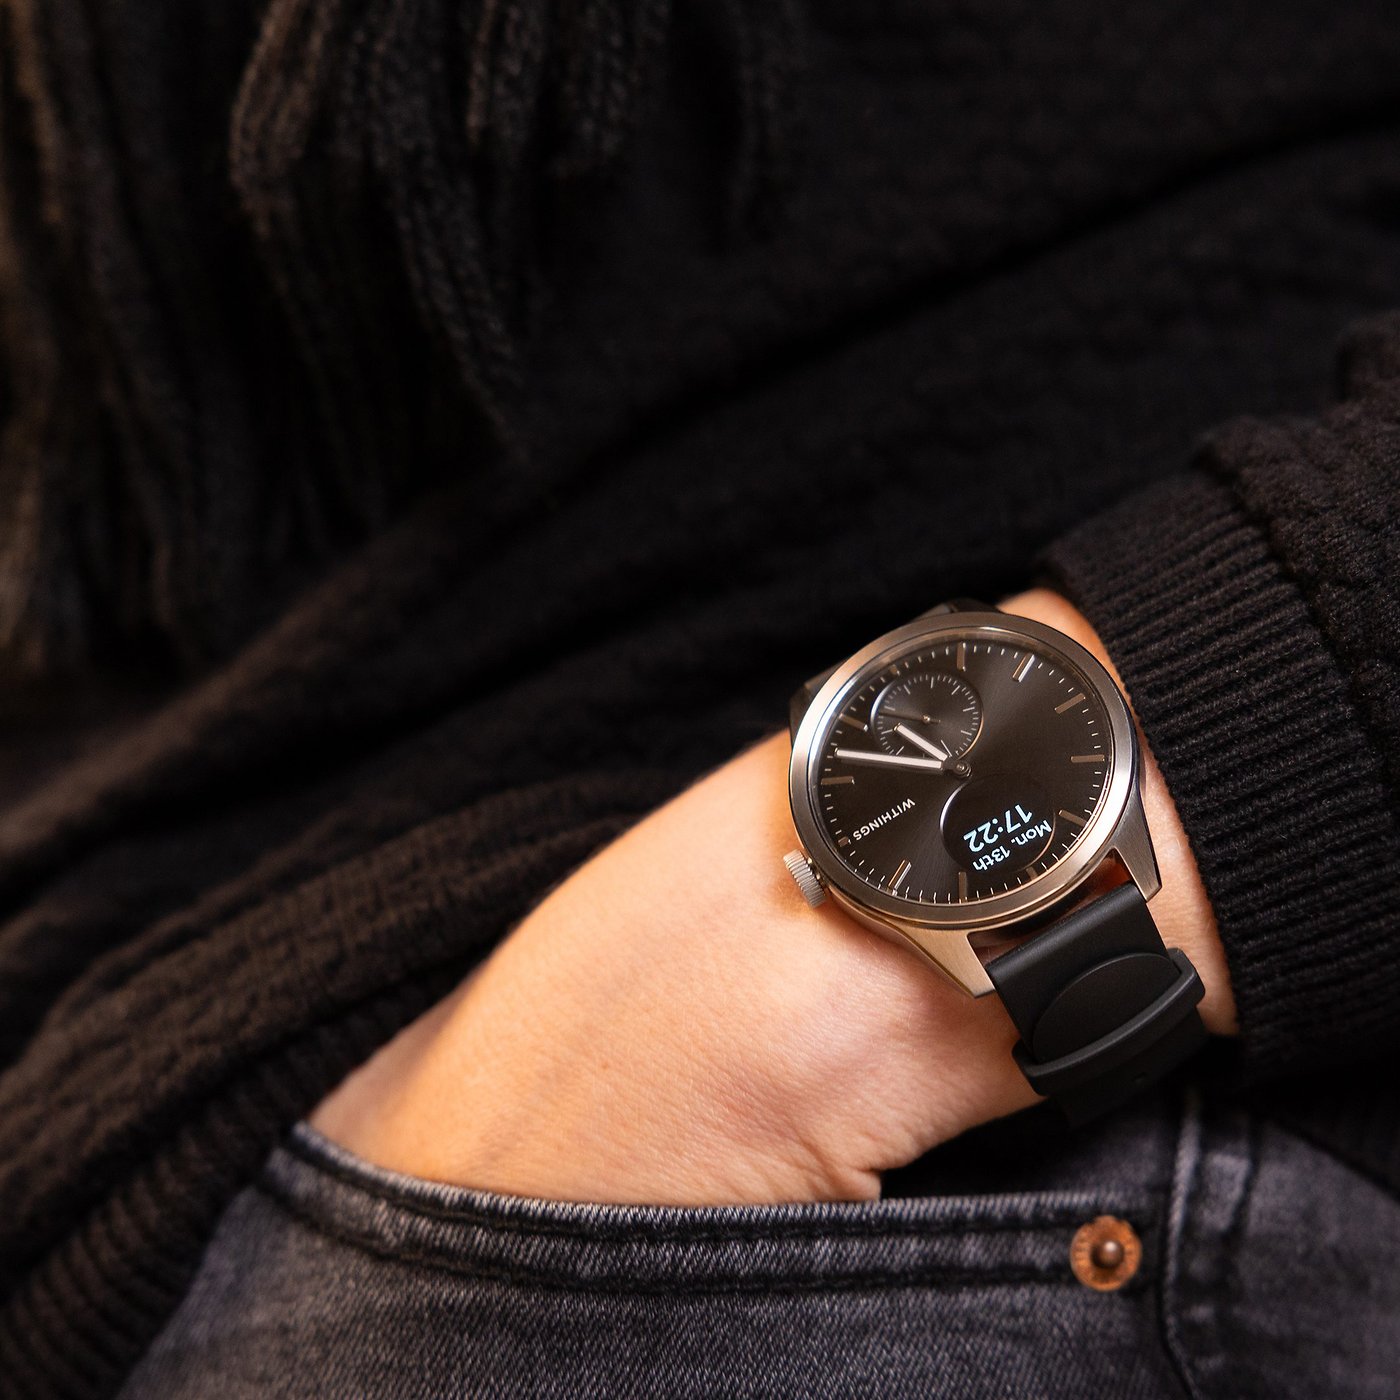 Withings' ScanWatch is the best hybrid smartwatch I've tried so far